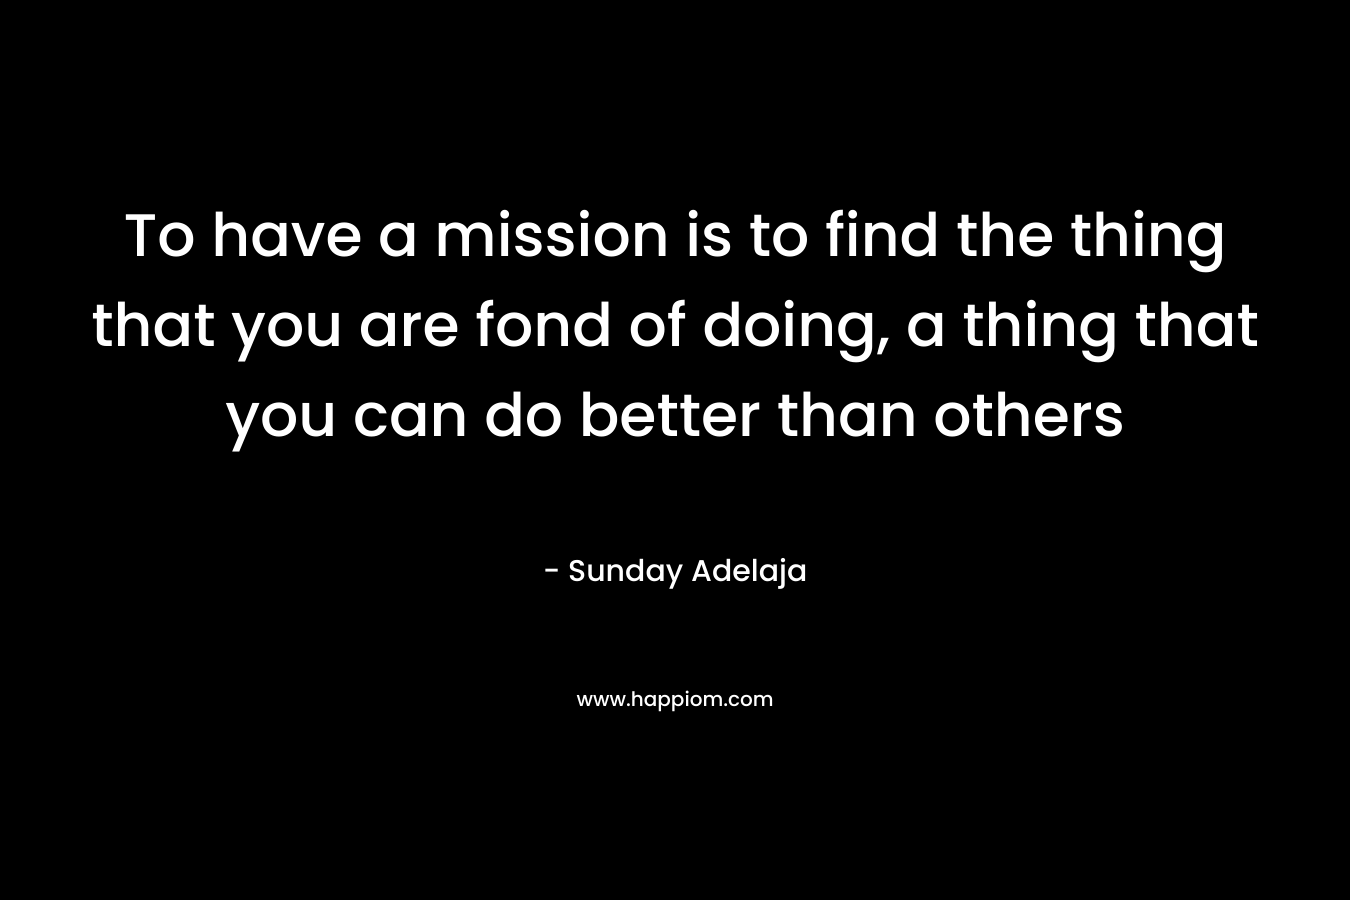 To have a mission is to find the thing that you are fond of doing, a thing that you can do better than others